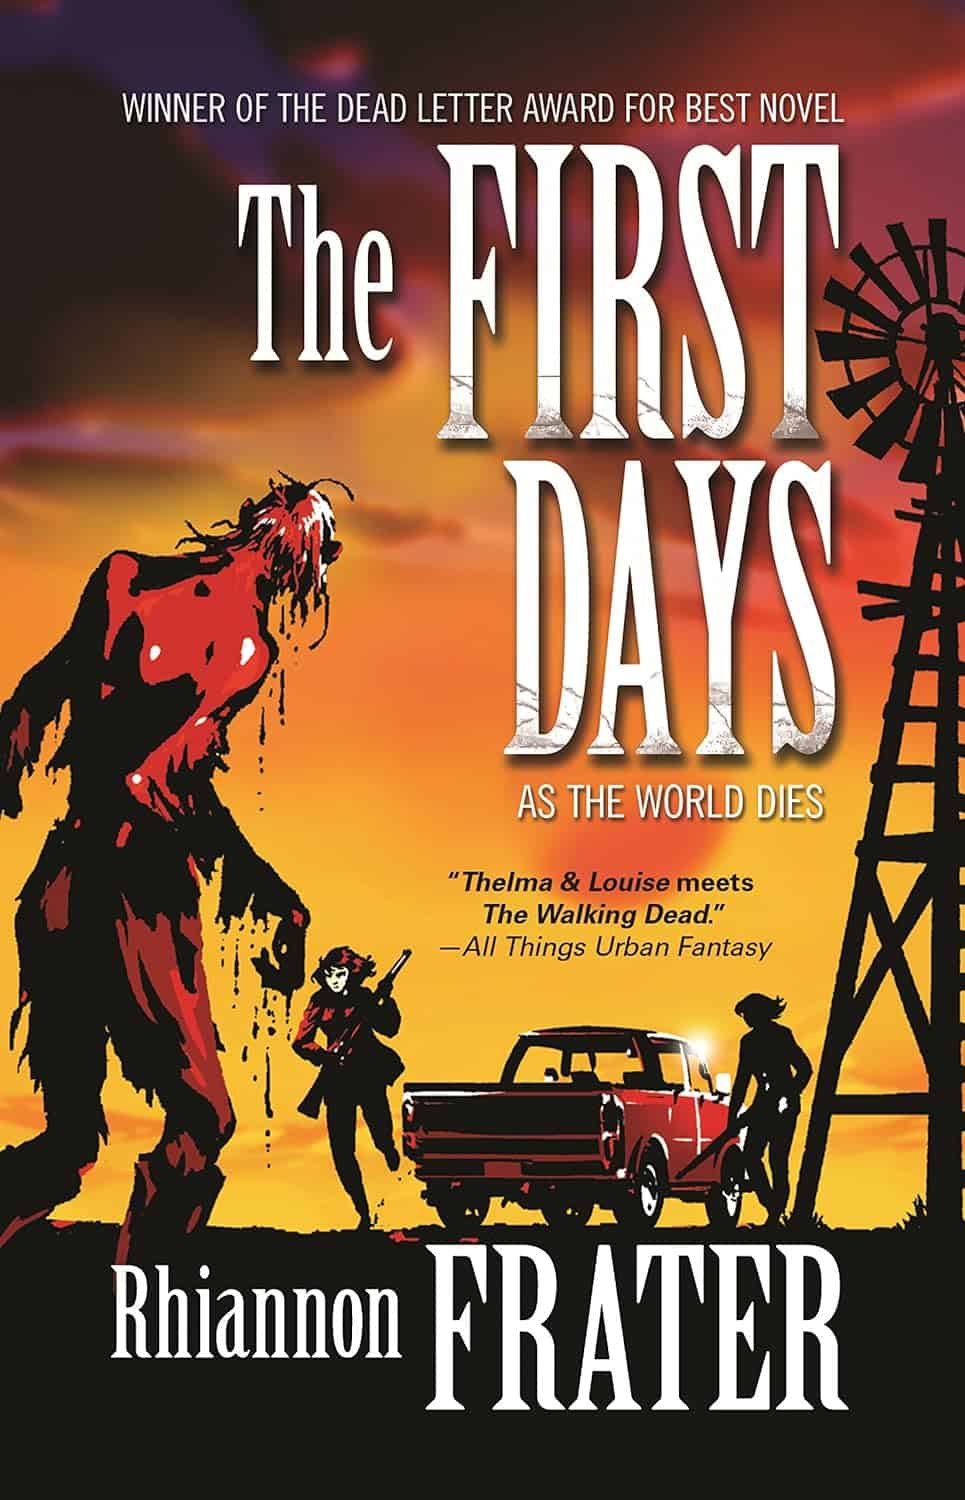 As the World Dies: The First Days by Rhiannon Frater